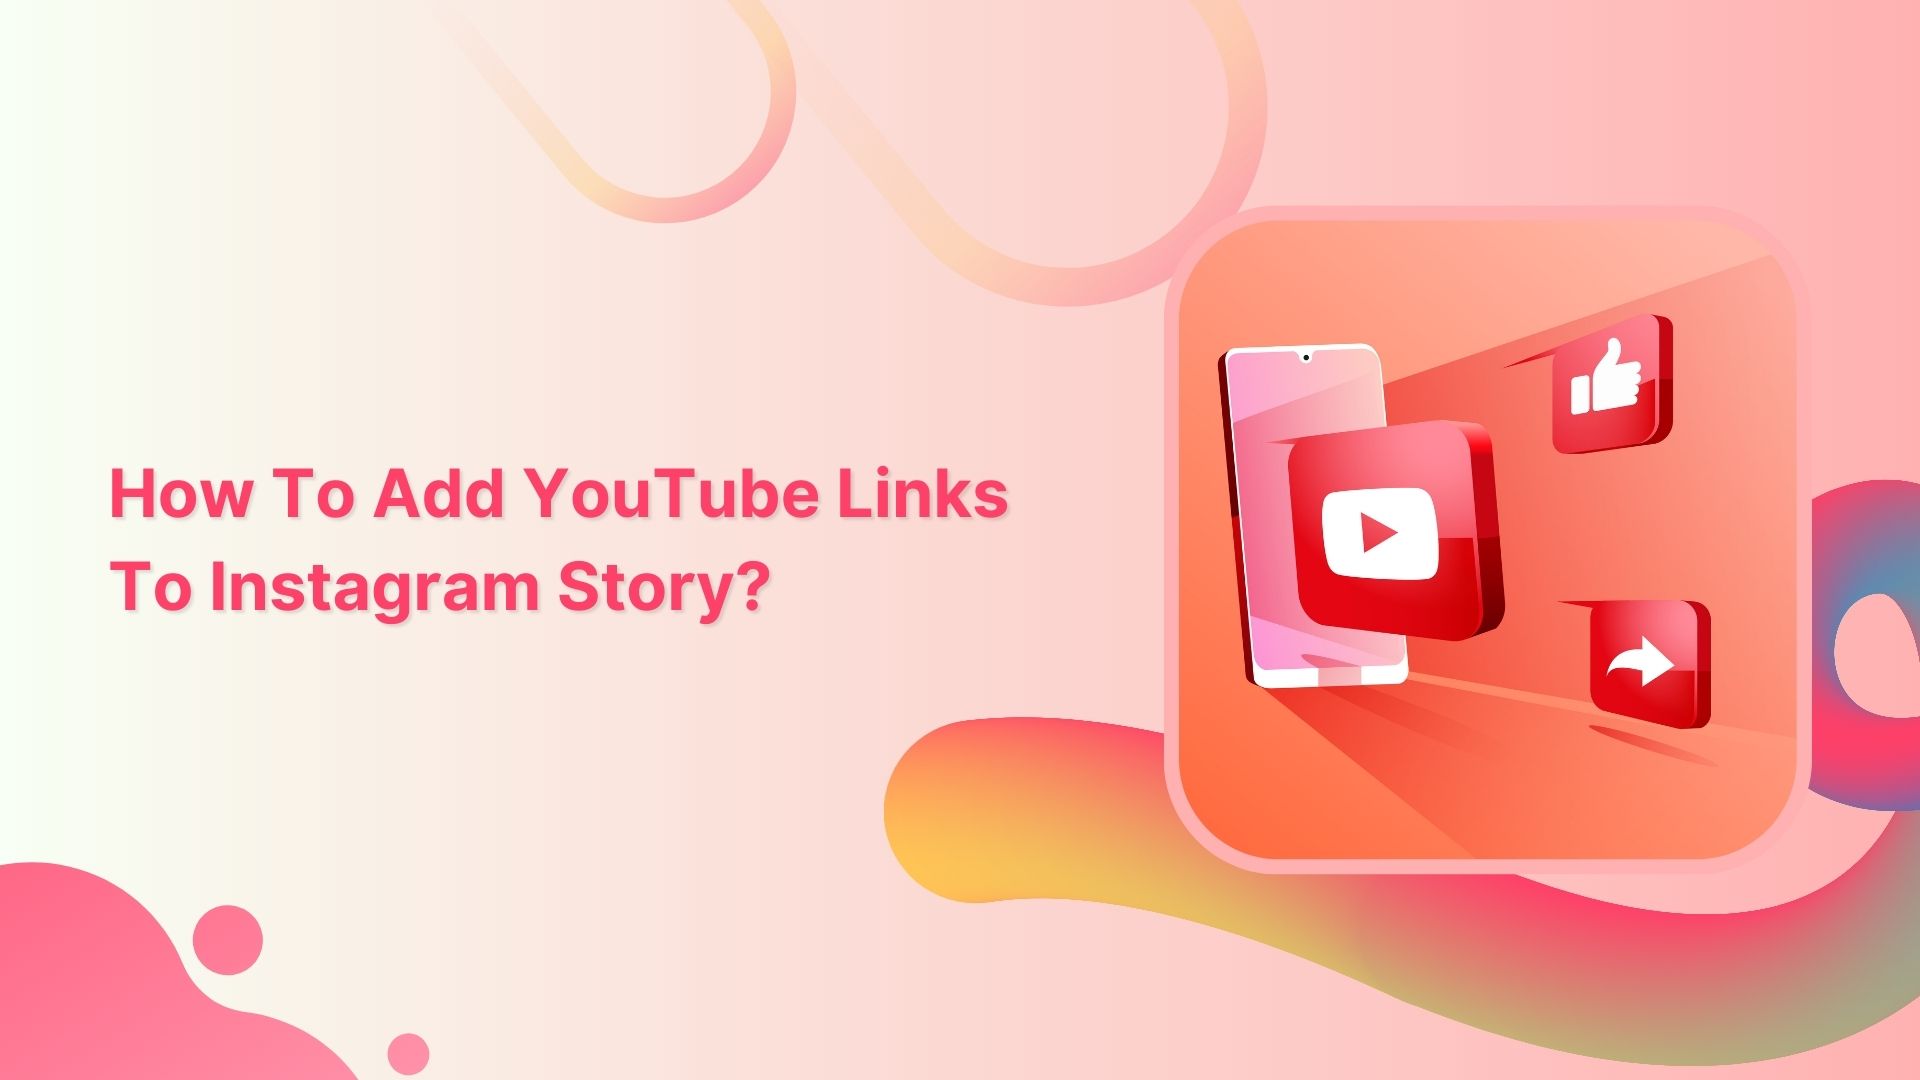 How to add YouTube links to Instagram story?